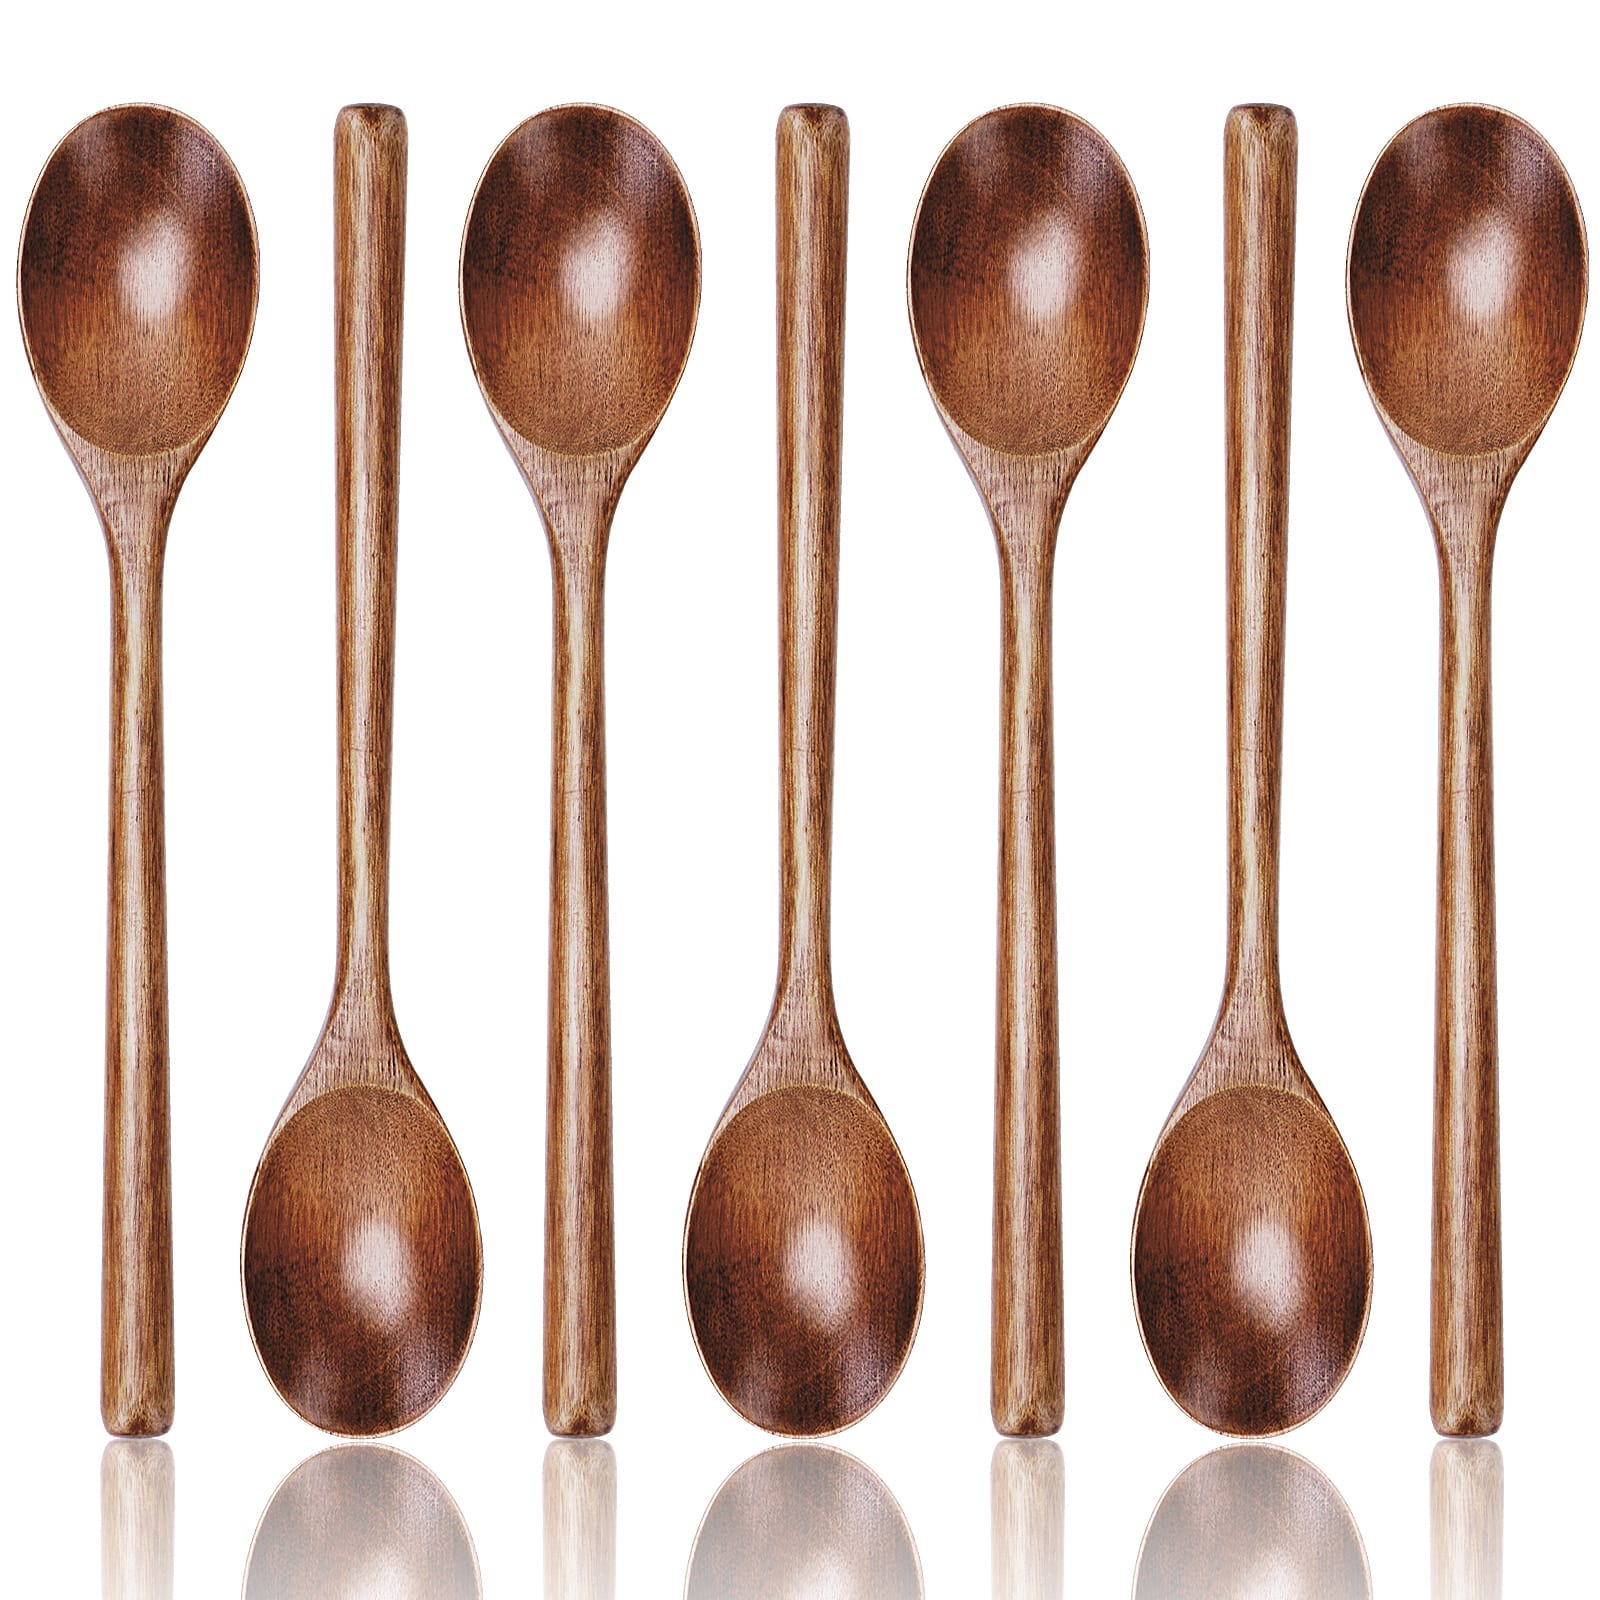 These are seven long-handled stirring spoons made of pure natural wood, large wooden spoons for cooking